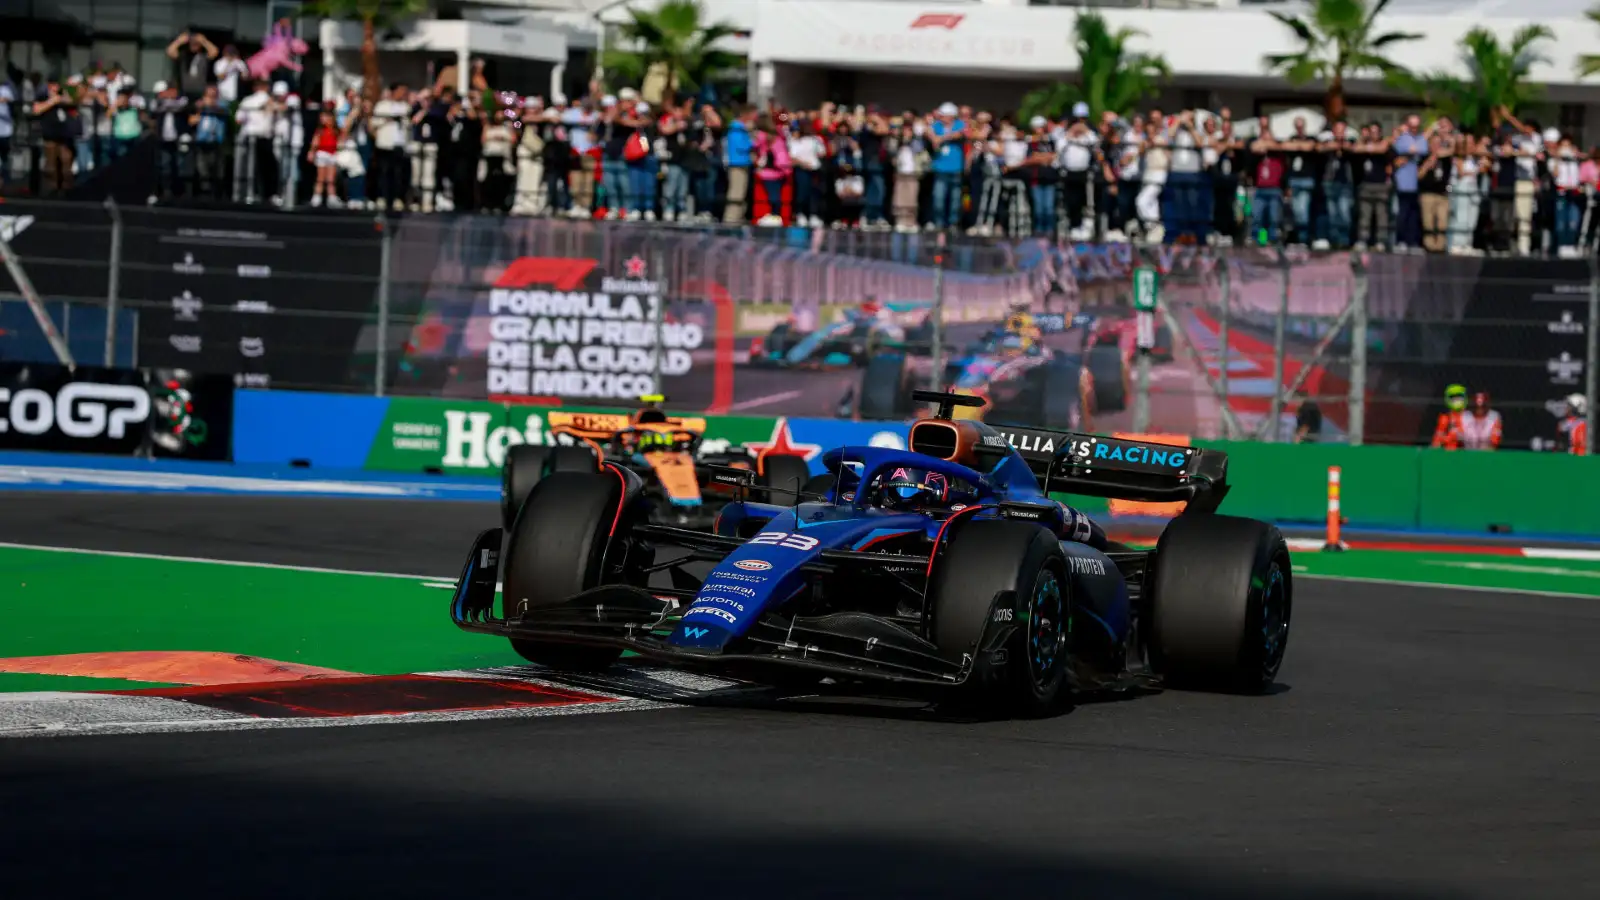 Fate of Canadian Grand Prix race to be determined by May 1 